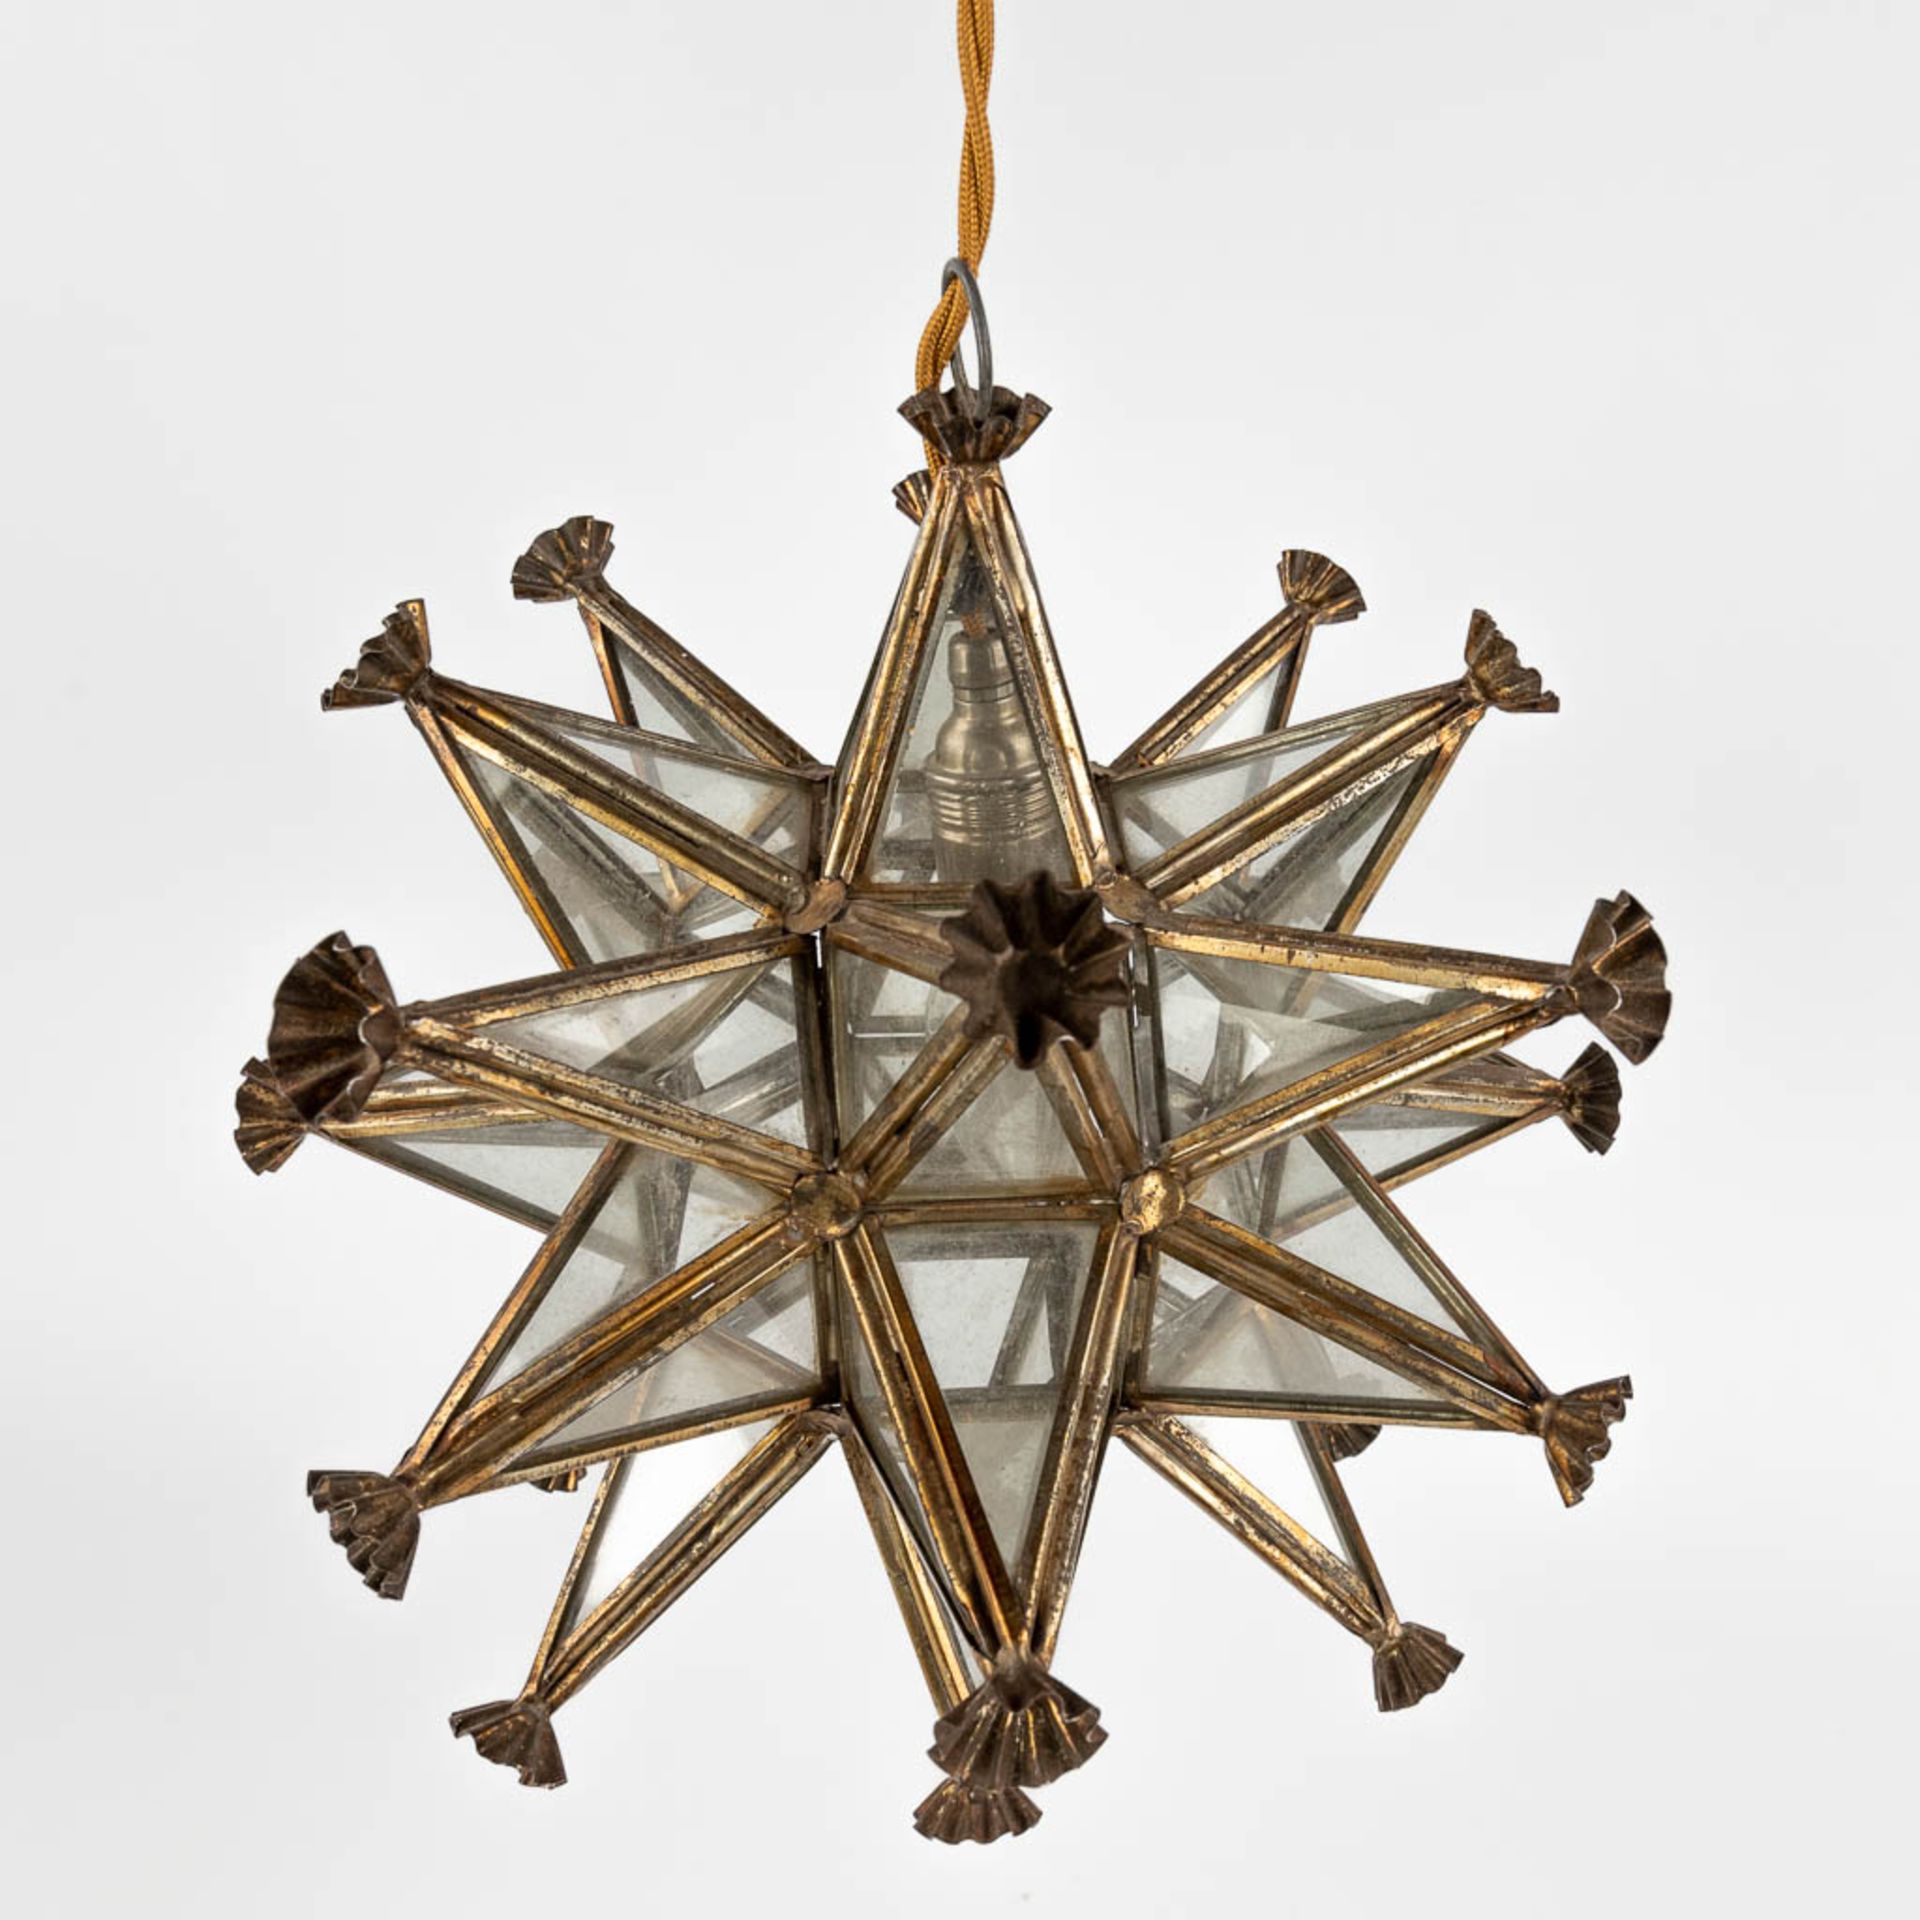 A lantern in the shape of a star, copper and glass, circa 1950. (W:25 x H:25 x D:25 cm)